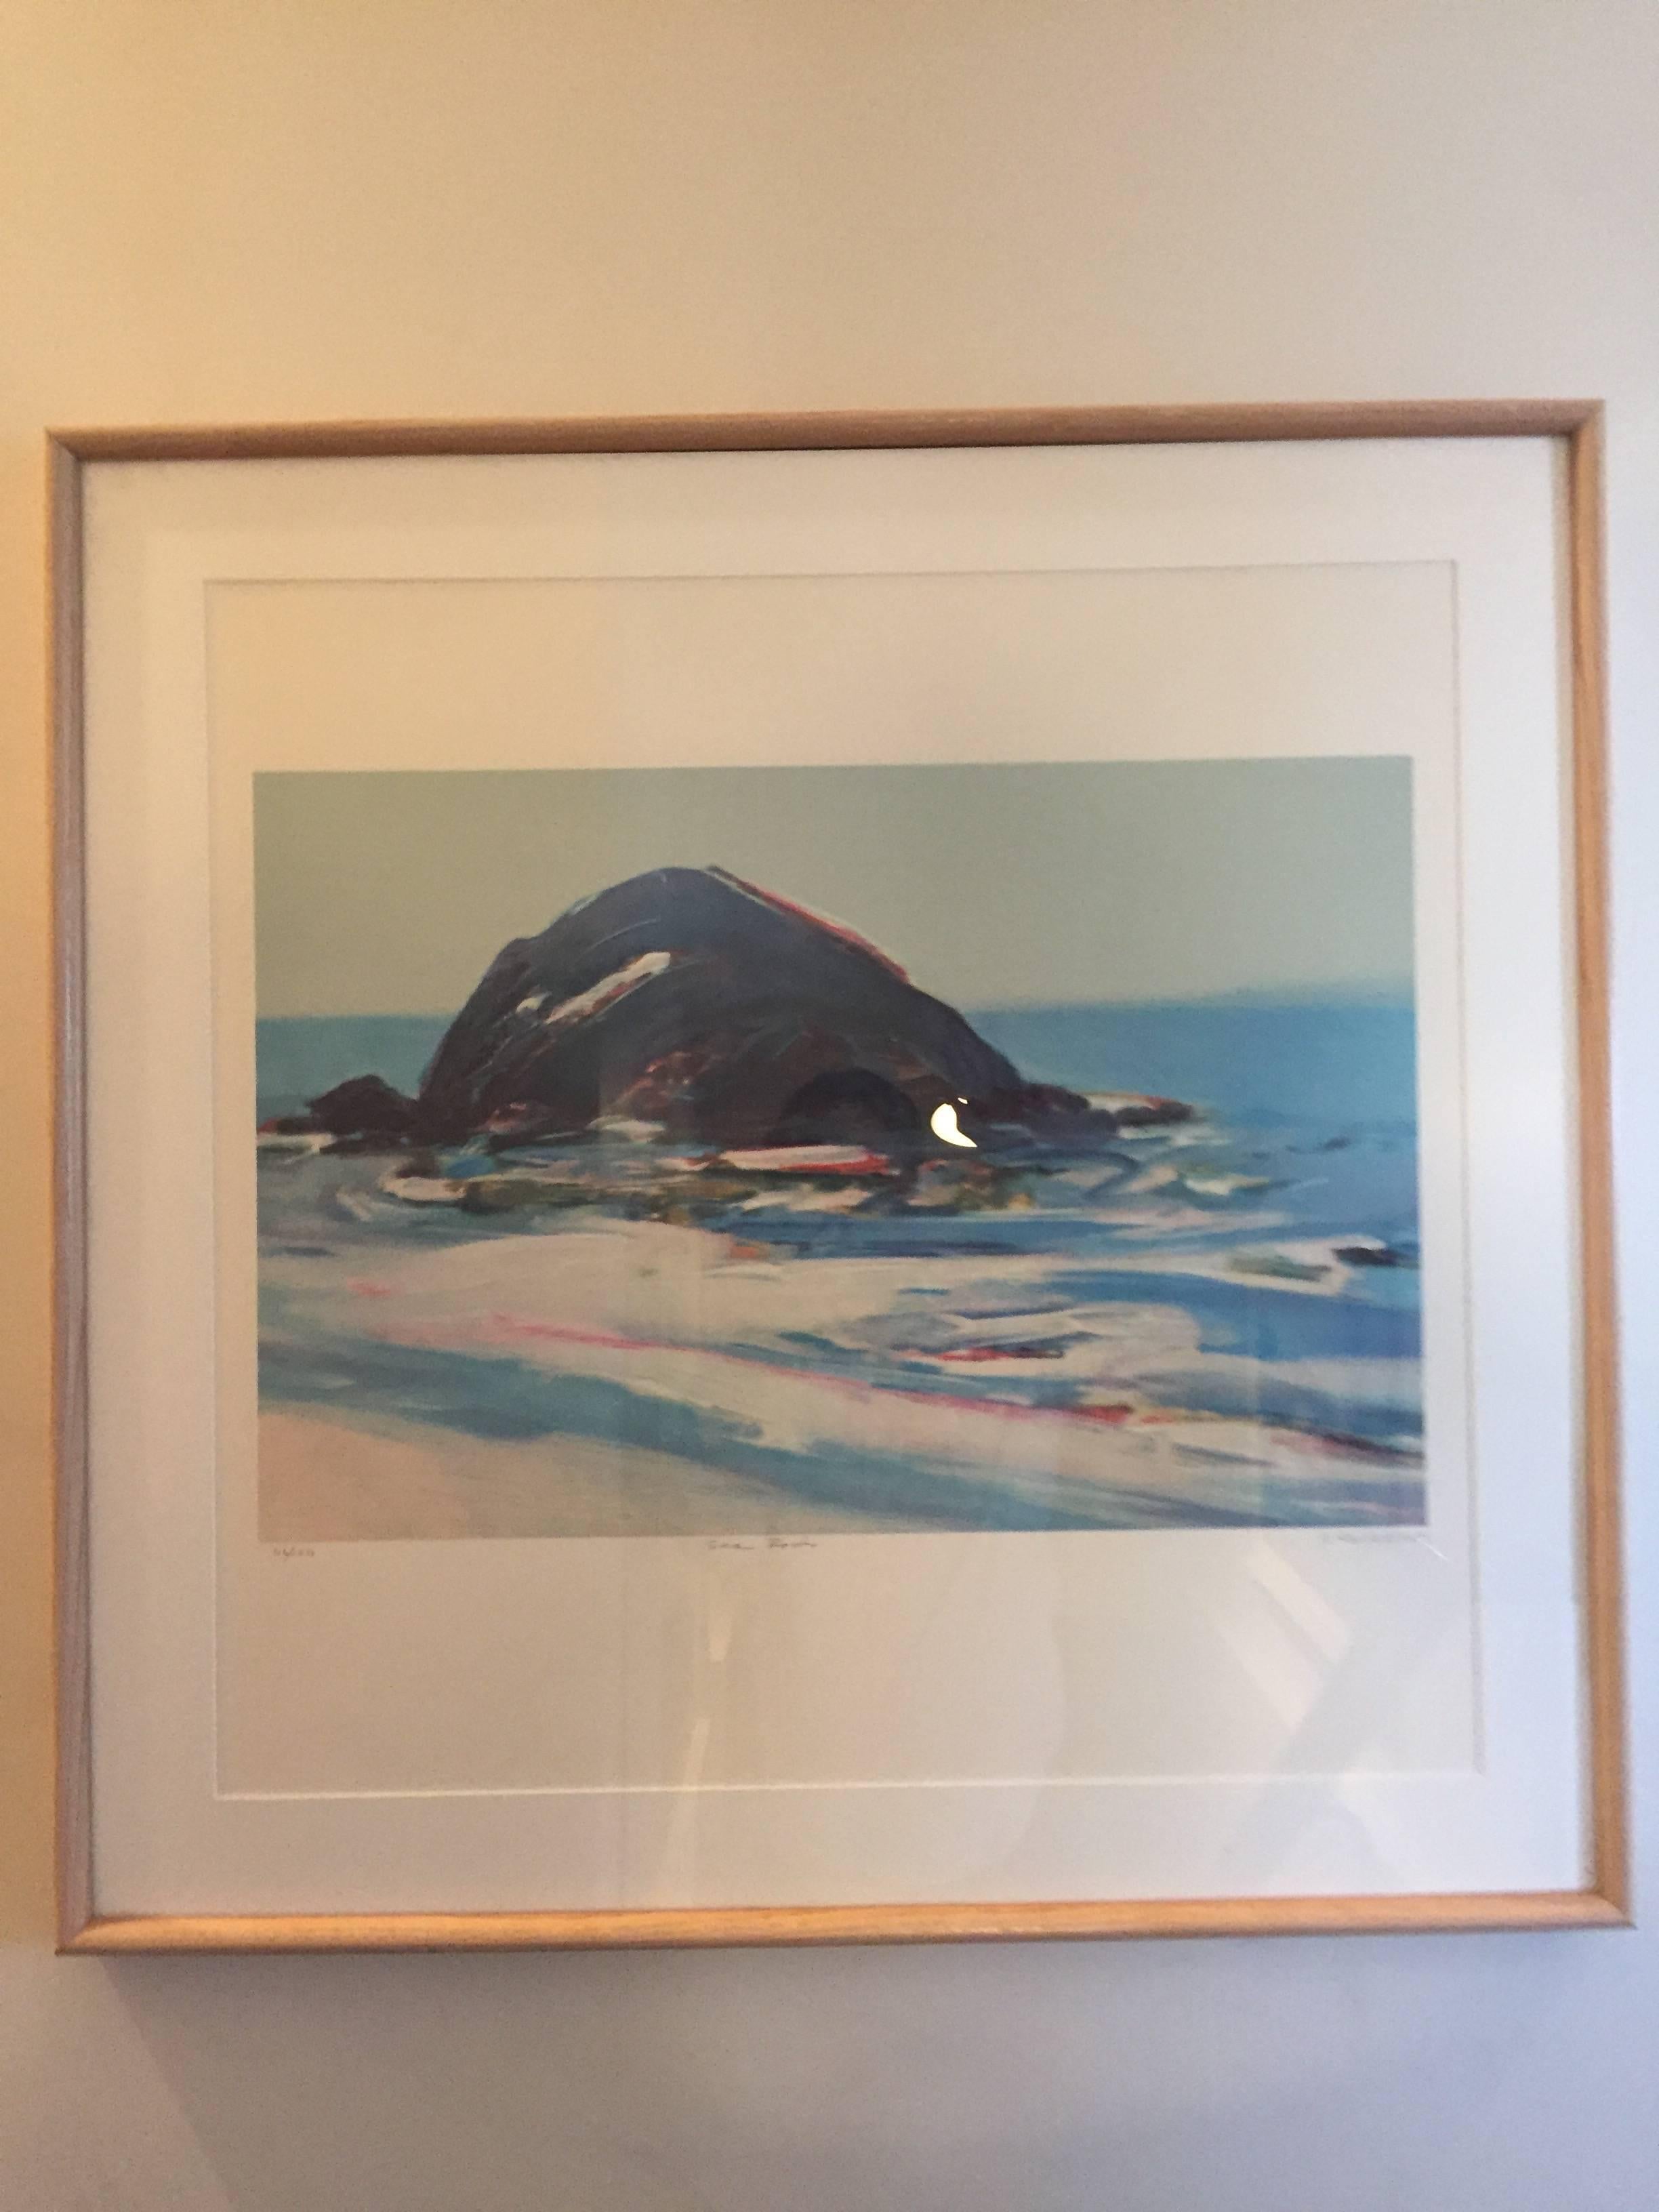 Print of painting by Sacramento, California, artist Gregory Kondos. One of a hundred prints. 

Dimensions of frame are listed below; dimensions of print are 23 in W x 15.25 in H.